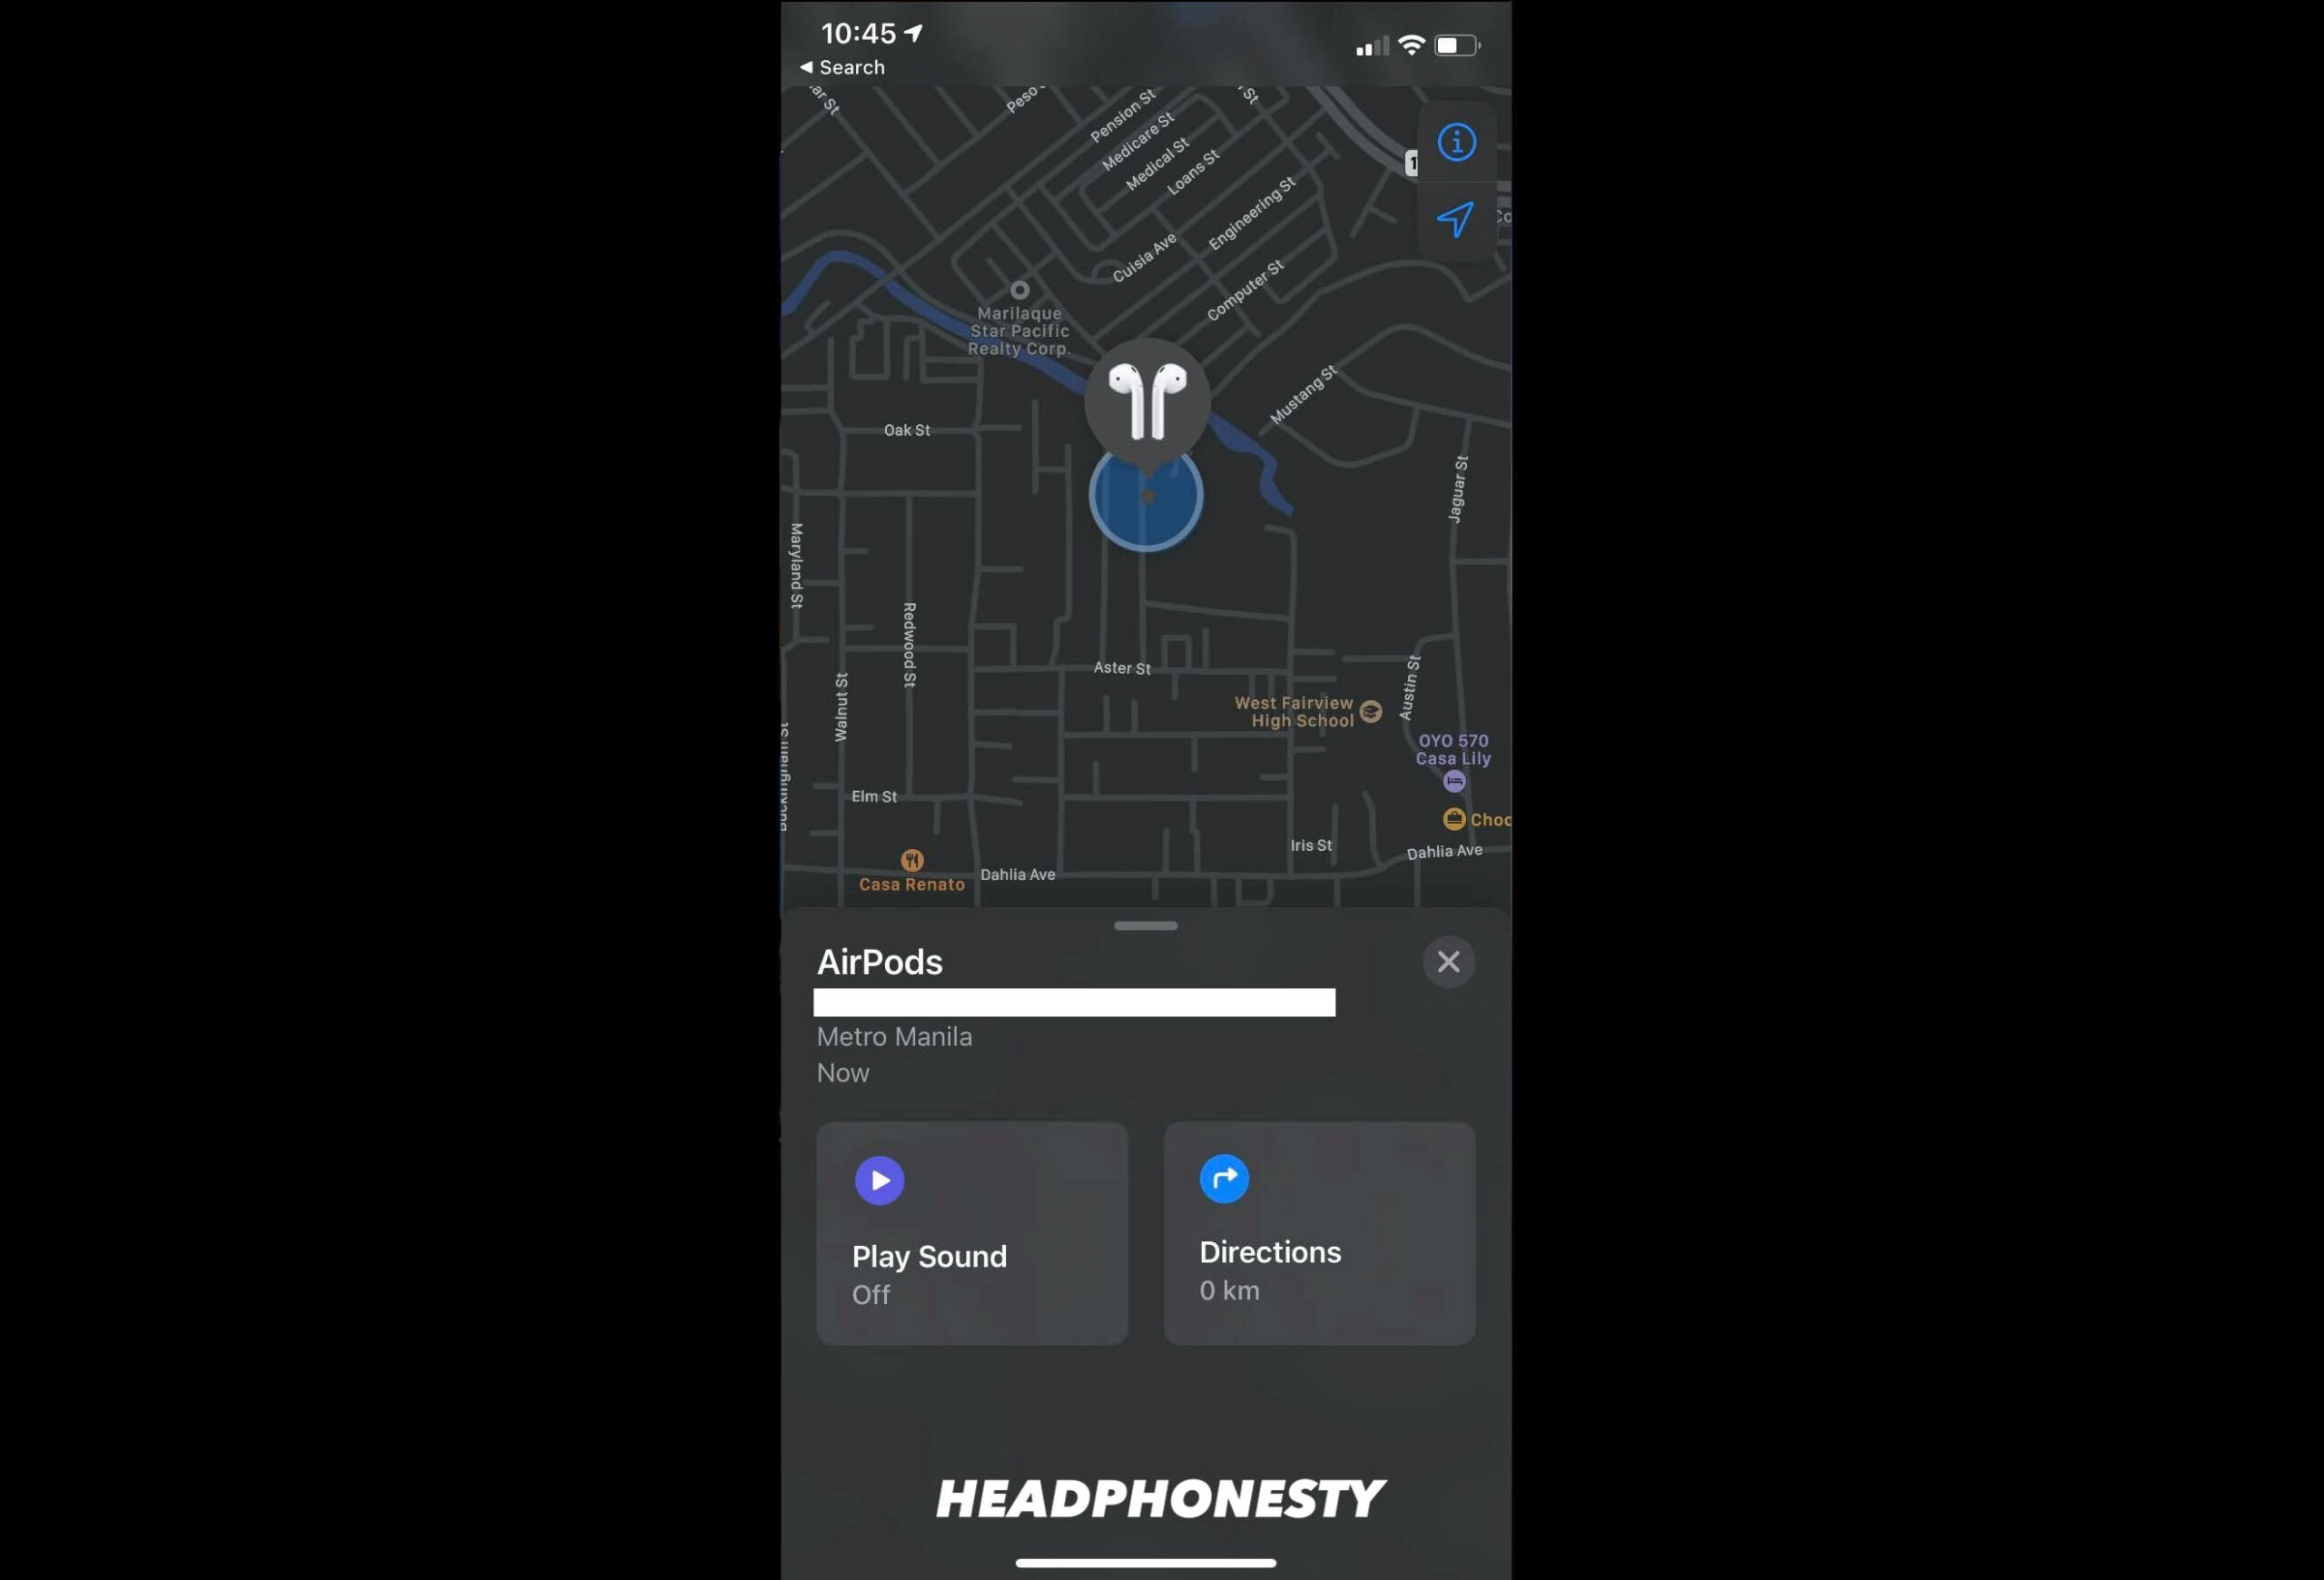 Features of the Find My app for original AirPods